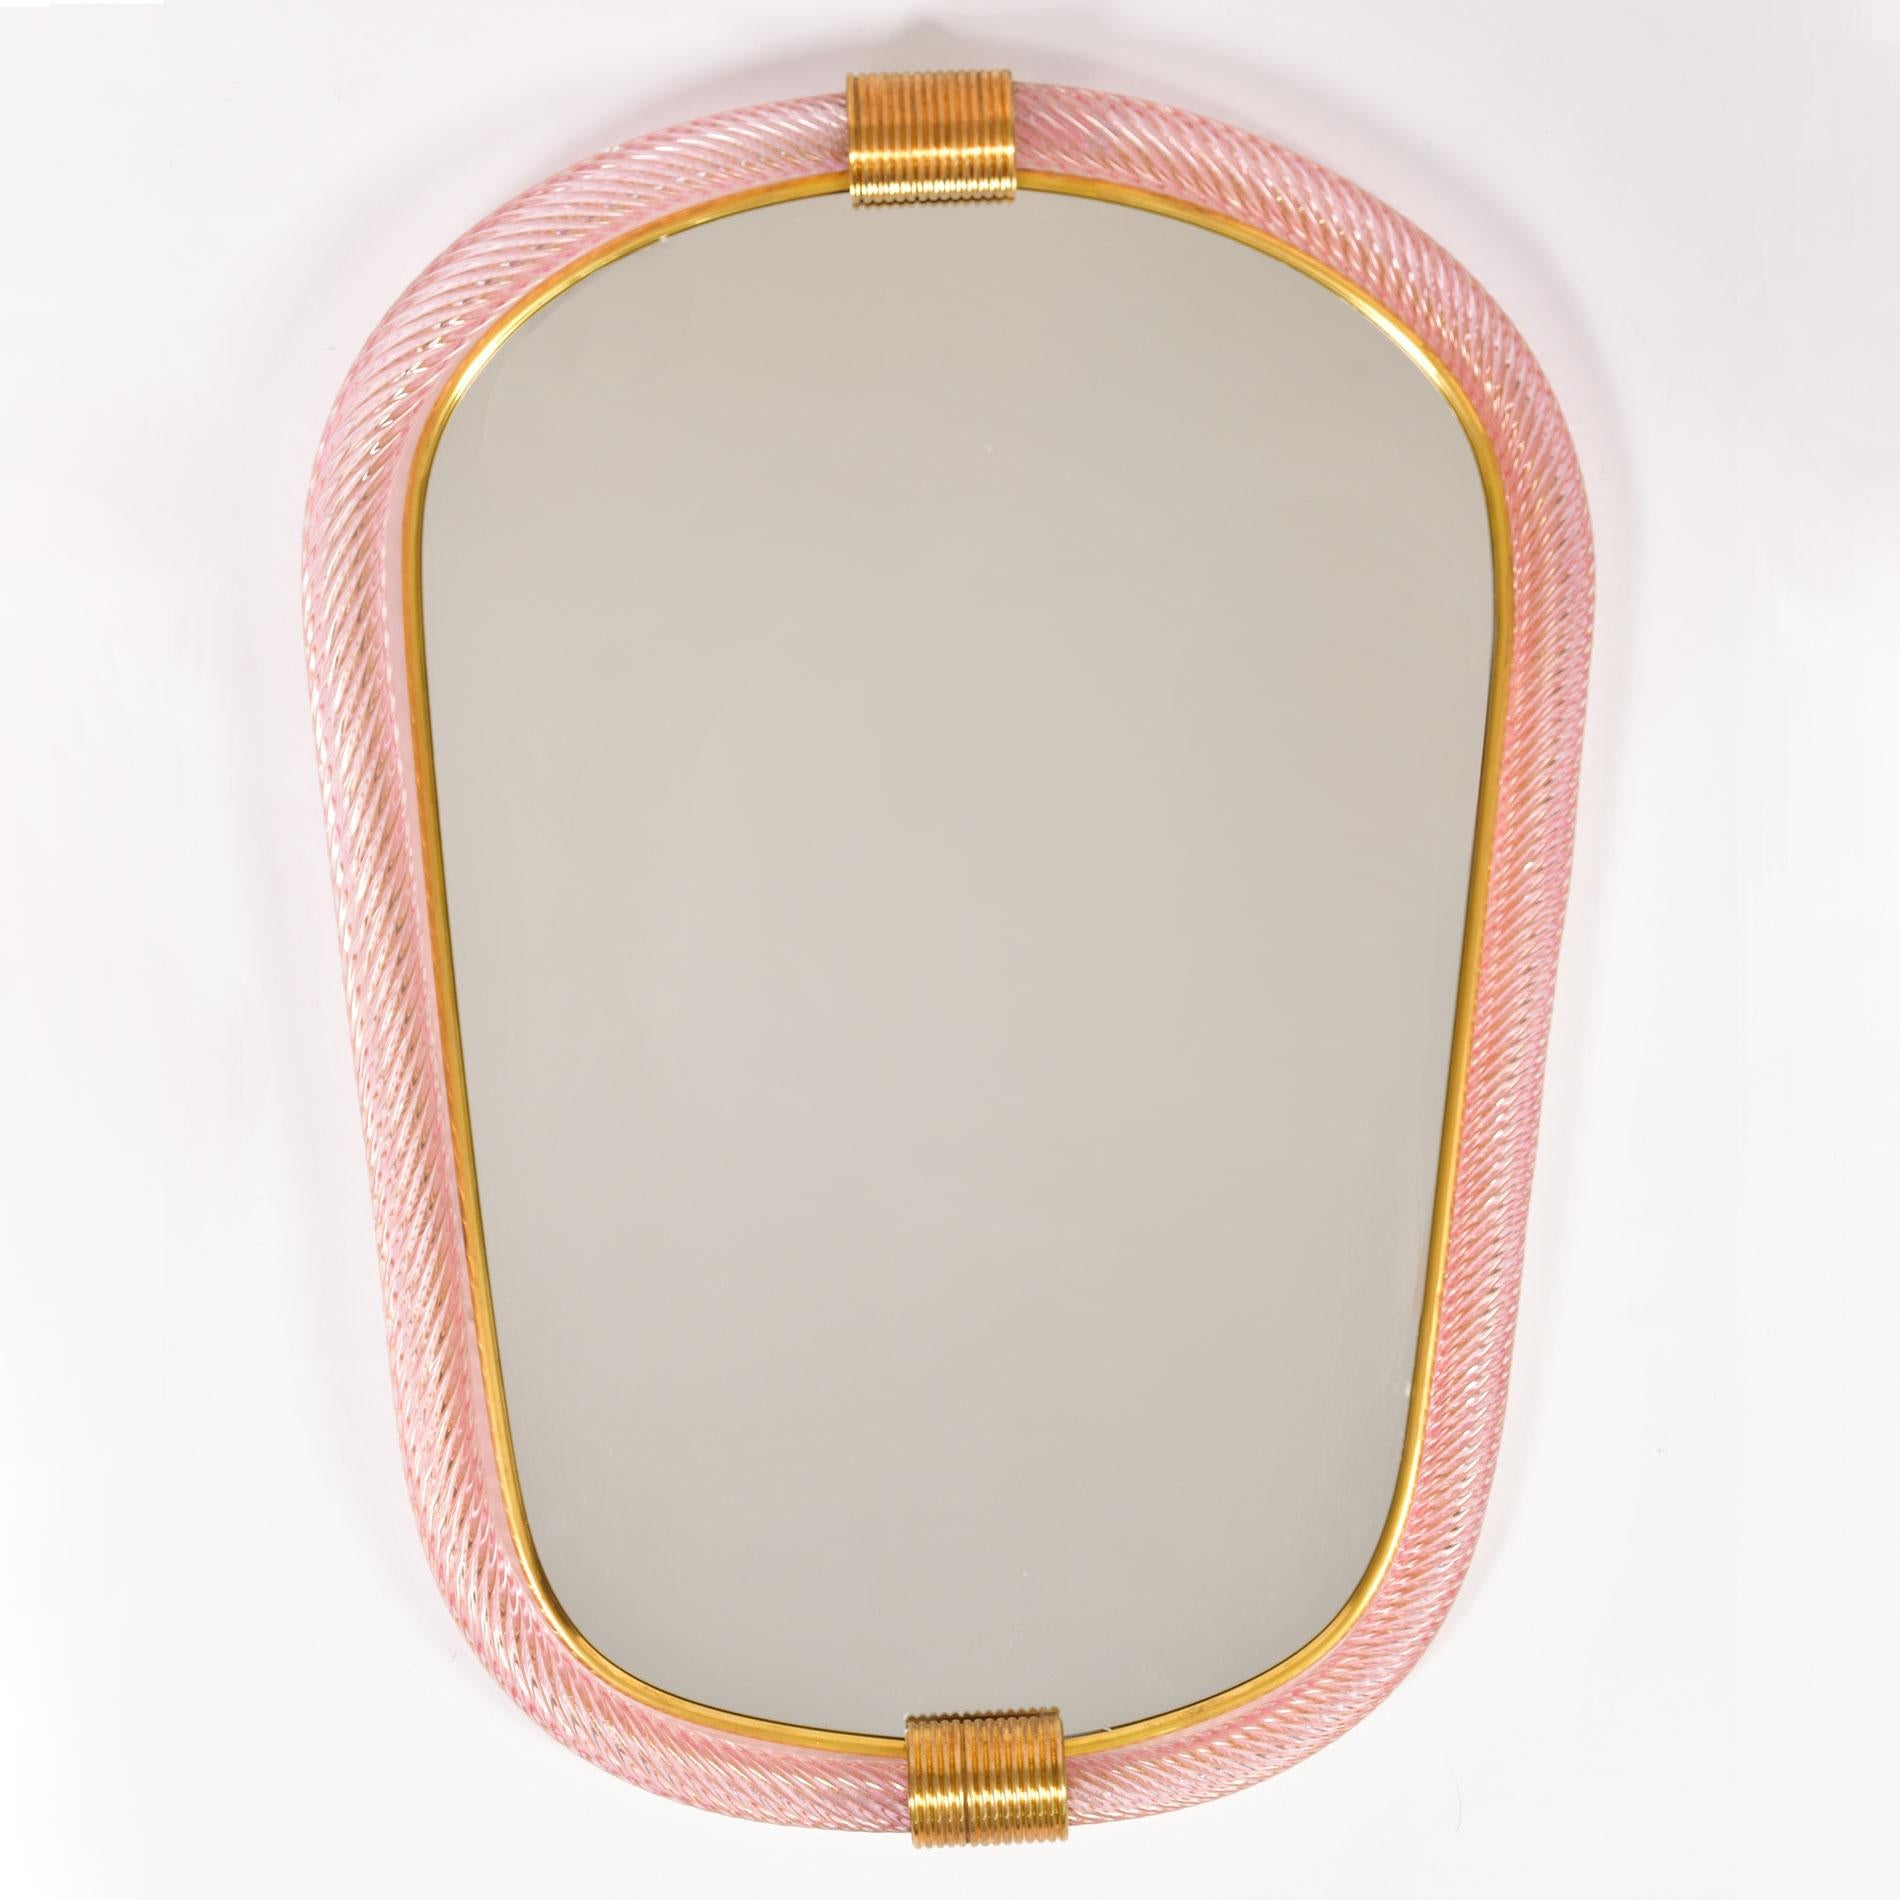 Pale pink with gold flecks ribbed hand-blown Murano glass eliptical mirror with two brass fluted clasps at the top and bottom, the inner edge lined with slender brass filet.

Also available in palest blue.

8-9 week lead-time if not in stock.